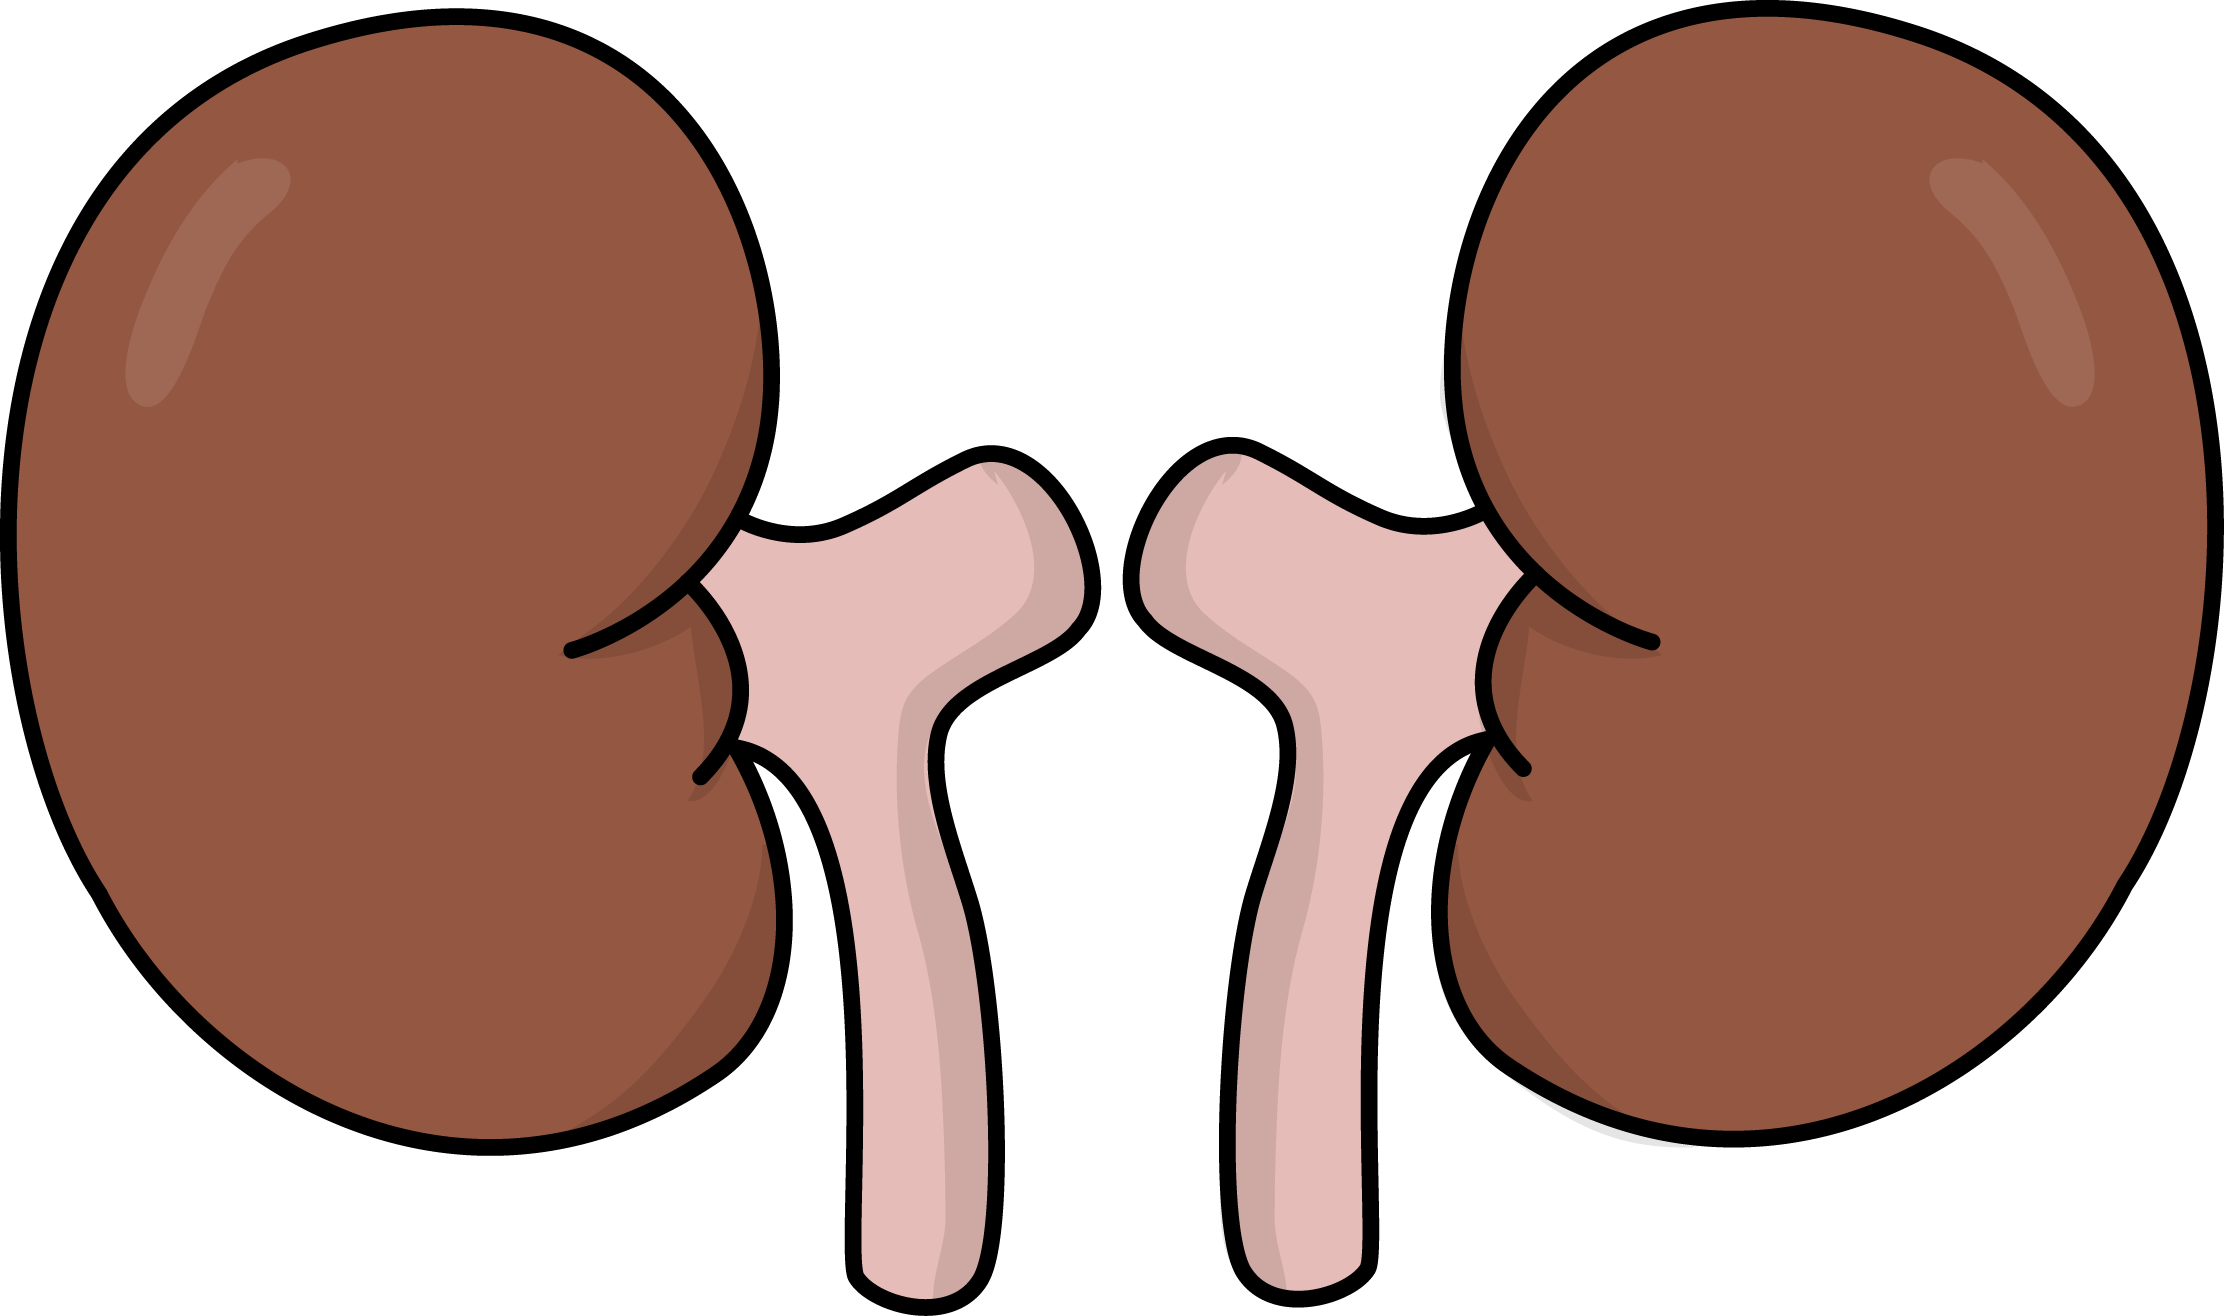  huge freebie download. Kidney clipart angry